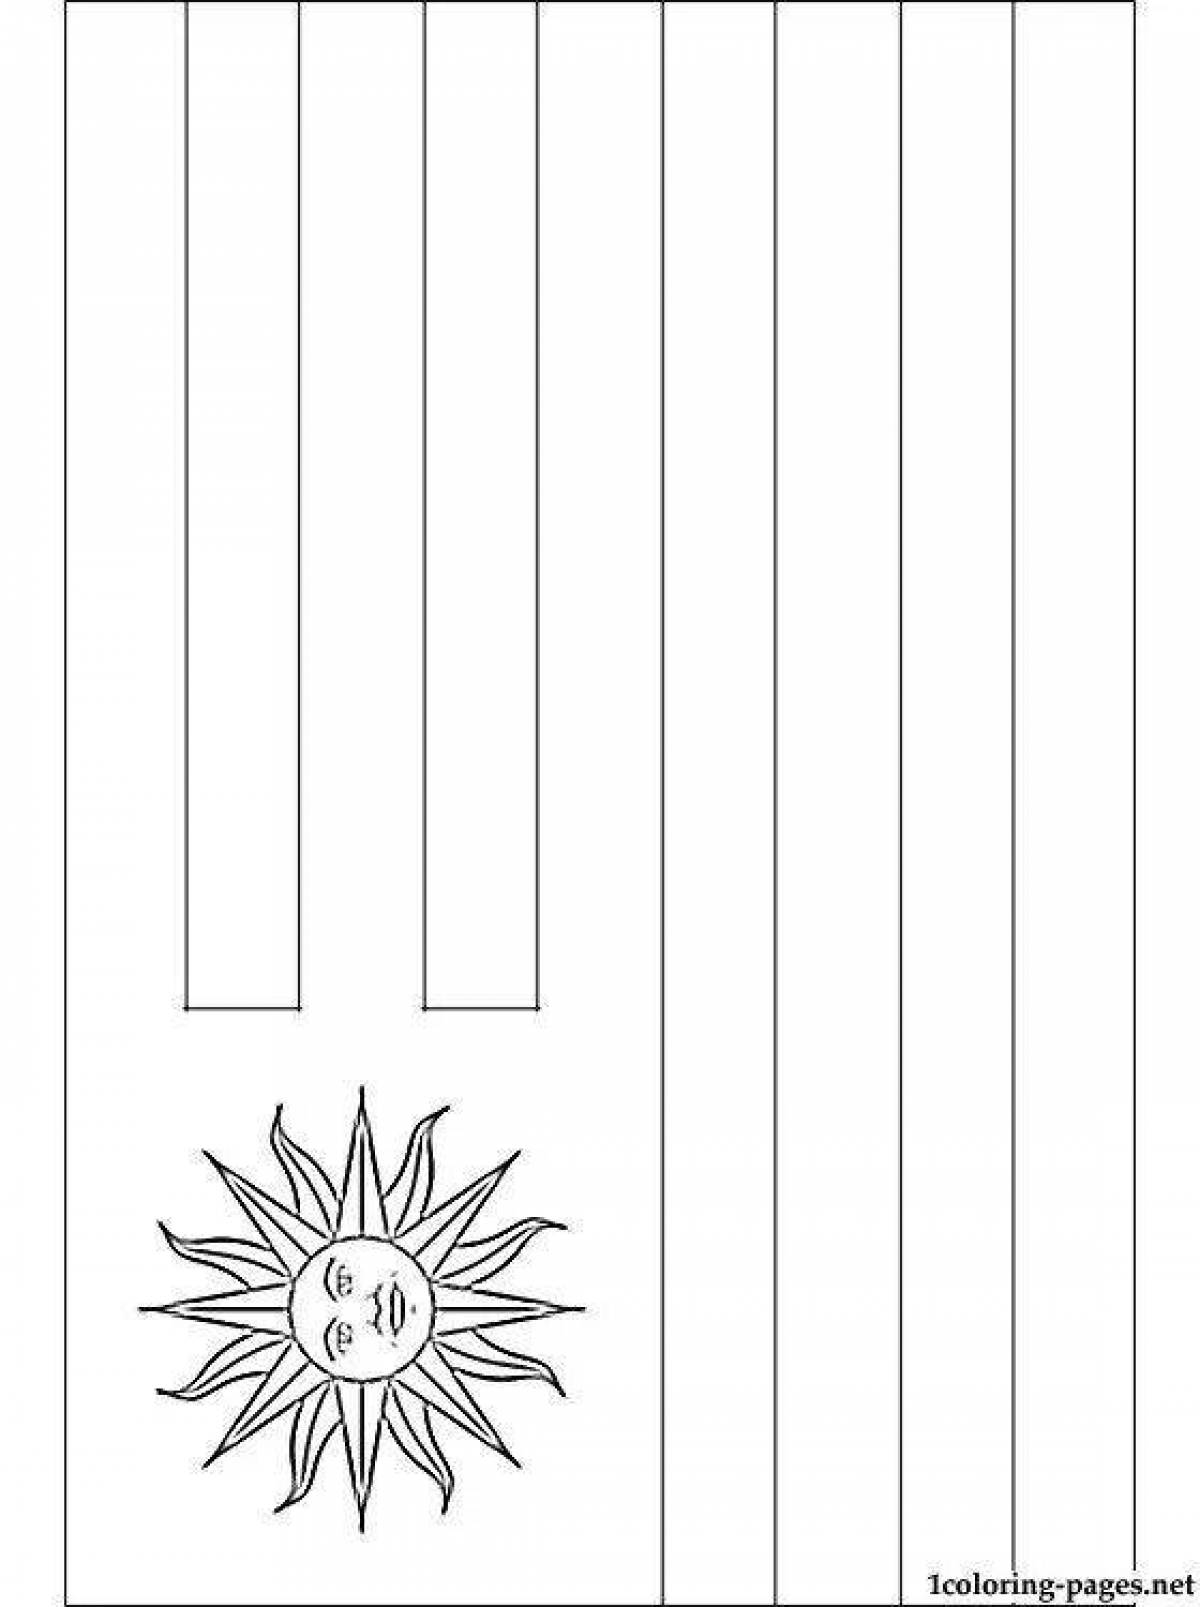 Coloring page argentina flag